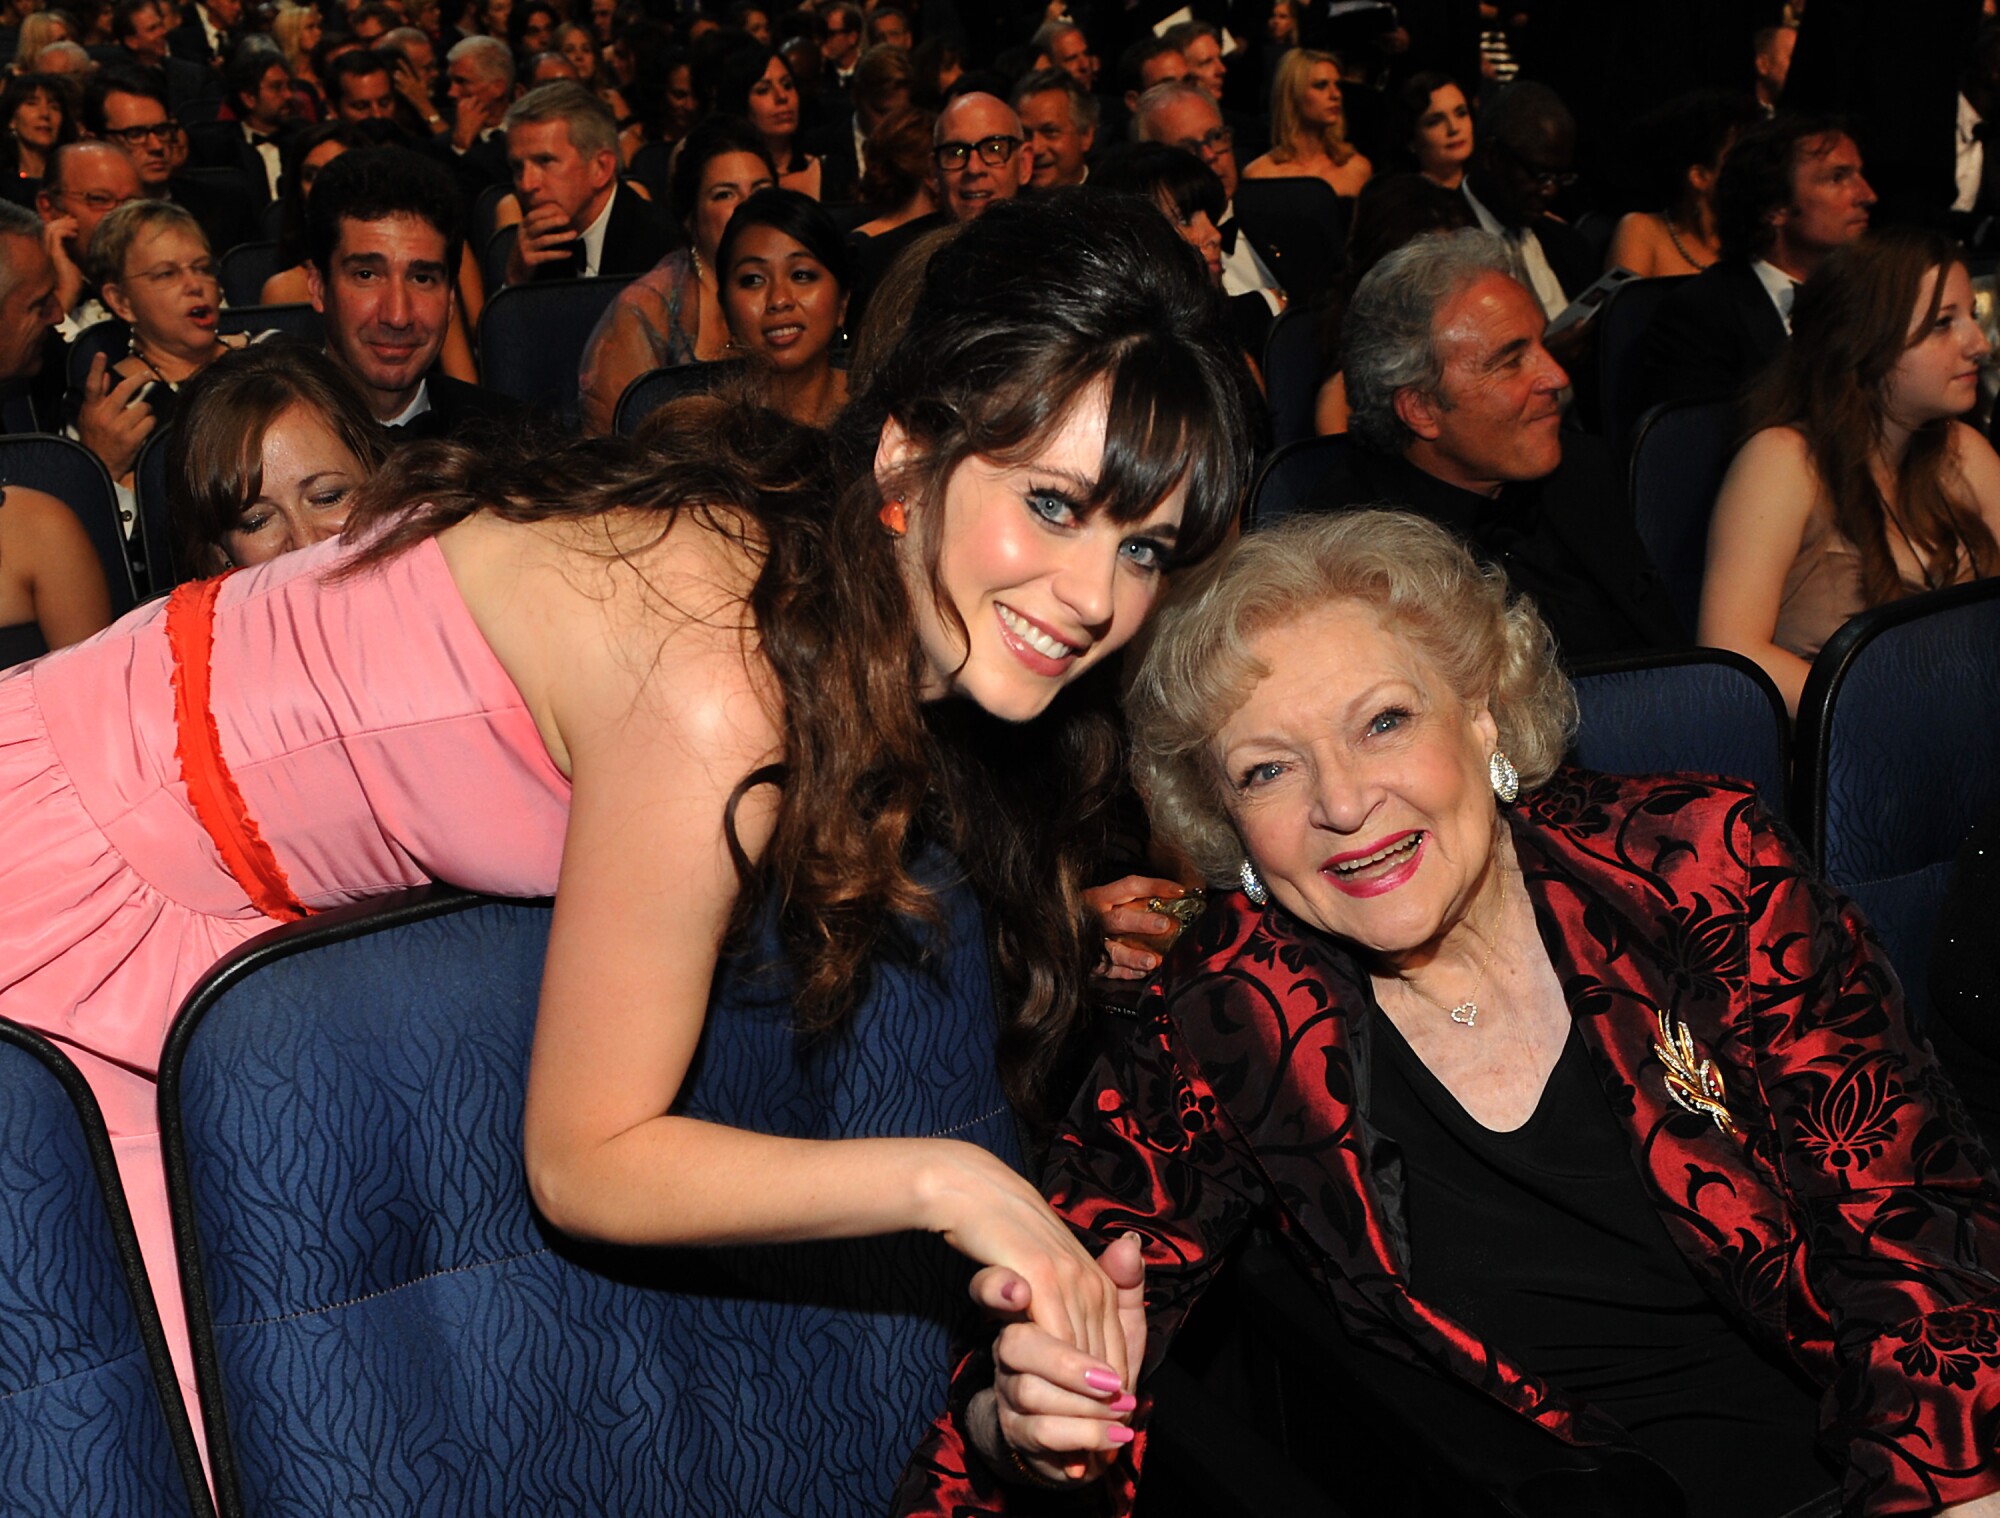 Zooey Deschanel and Betty White at the Emmy Awards at Nokia Theater LA Live on September 18, 2011.